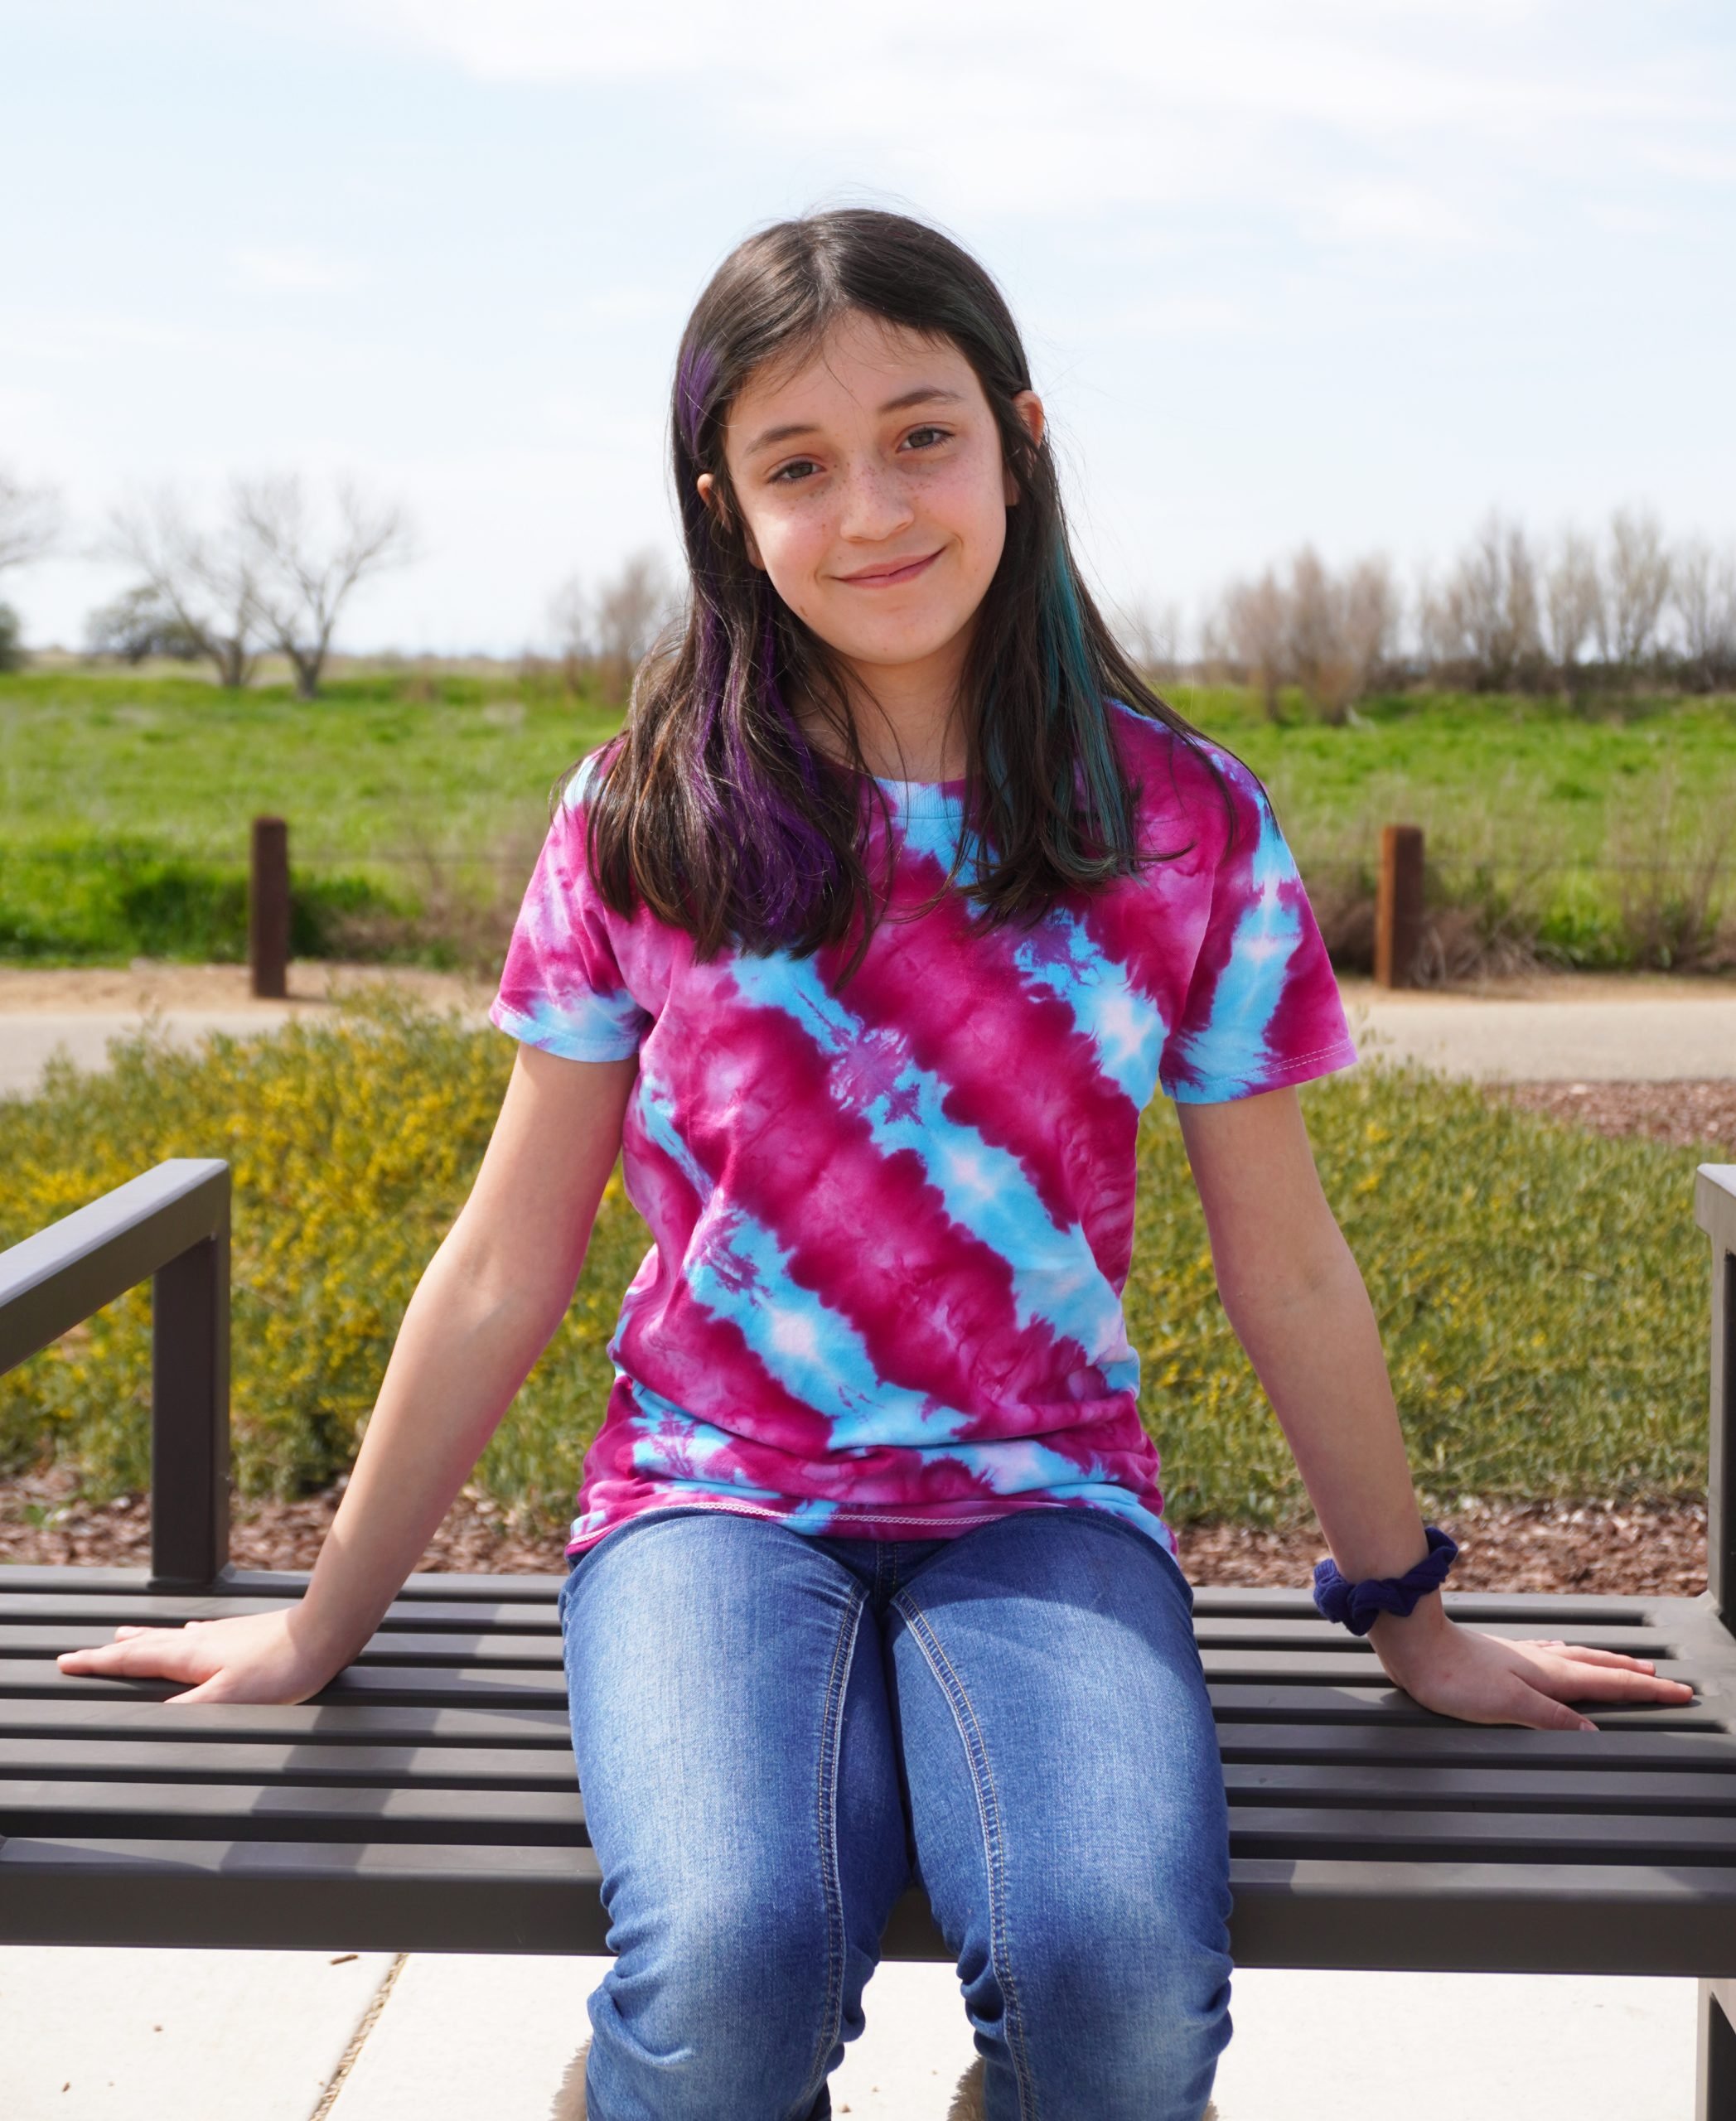 Dark haired 12 year old girl wearing a pink and blue tie dyed t-shirt on an outdoor bench